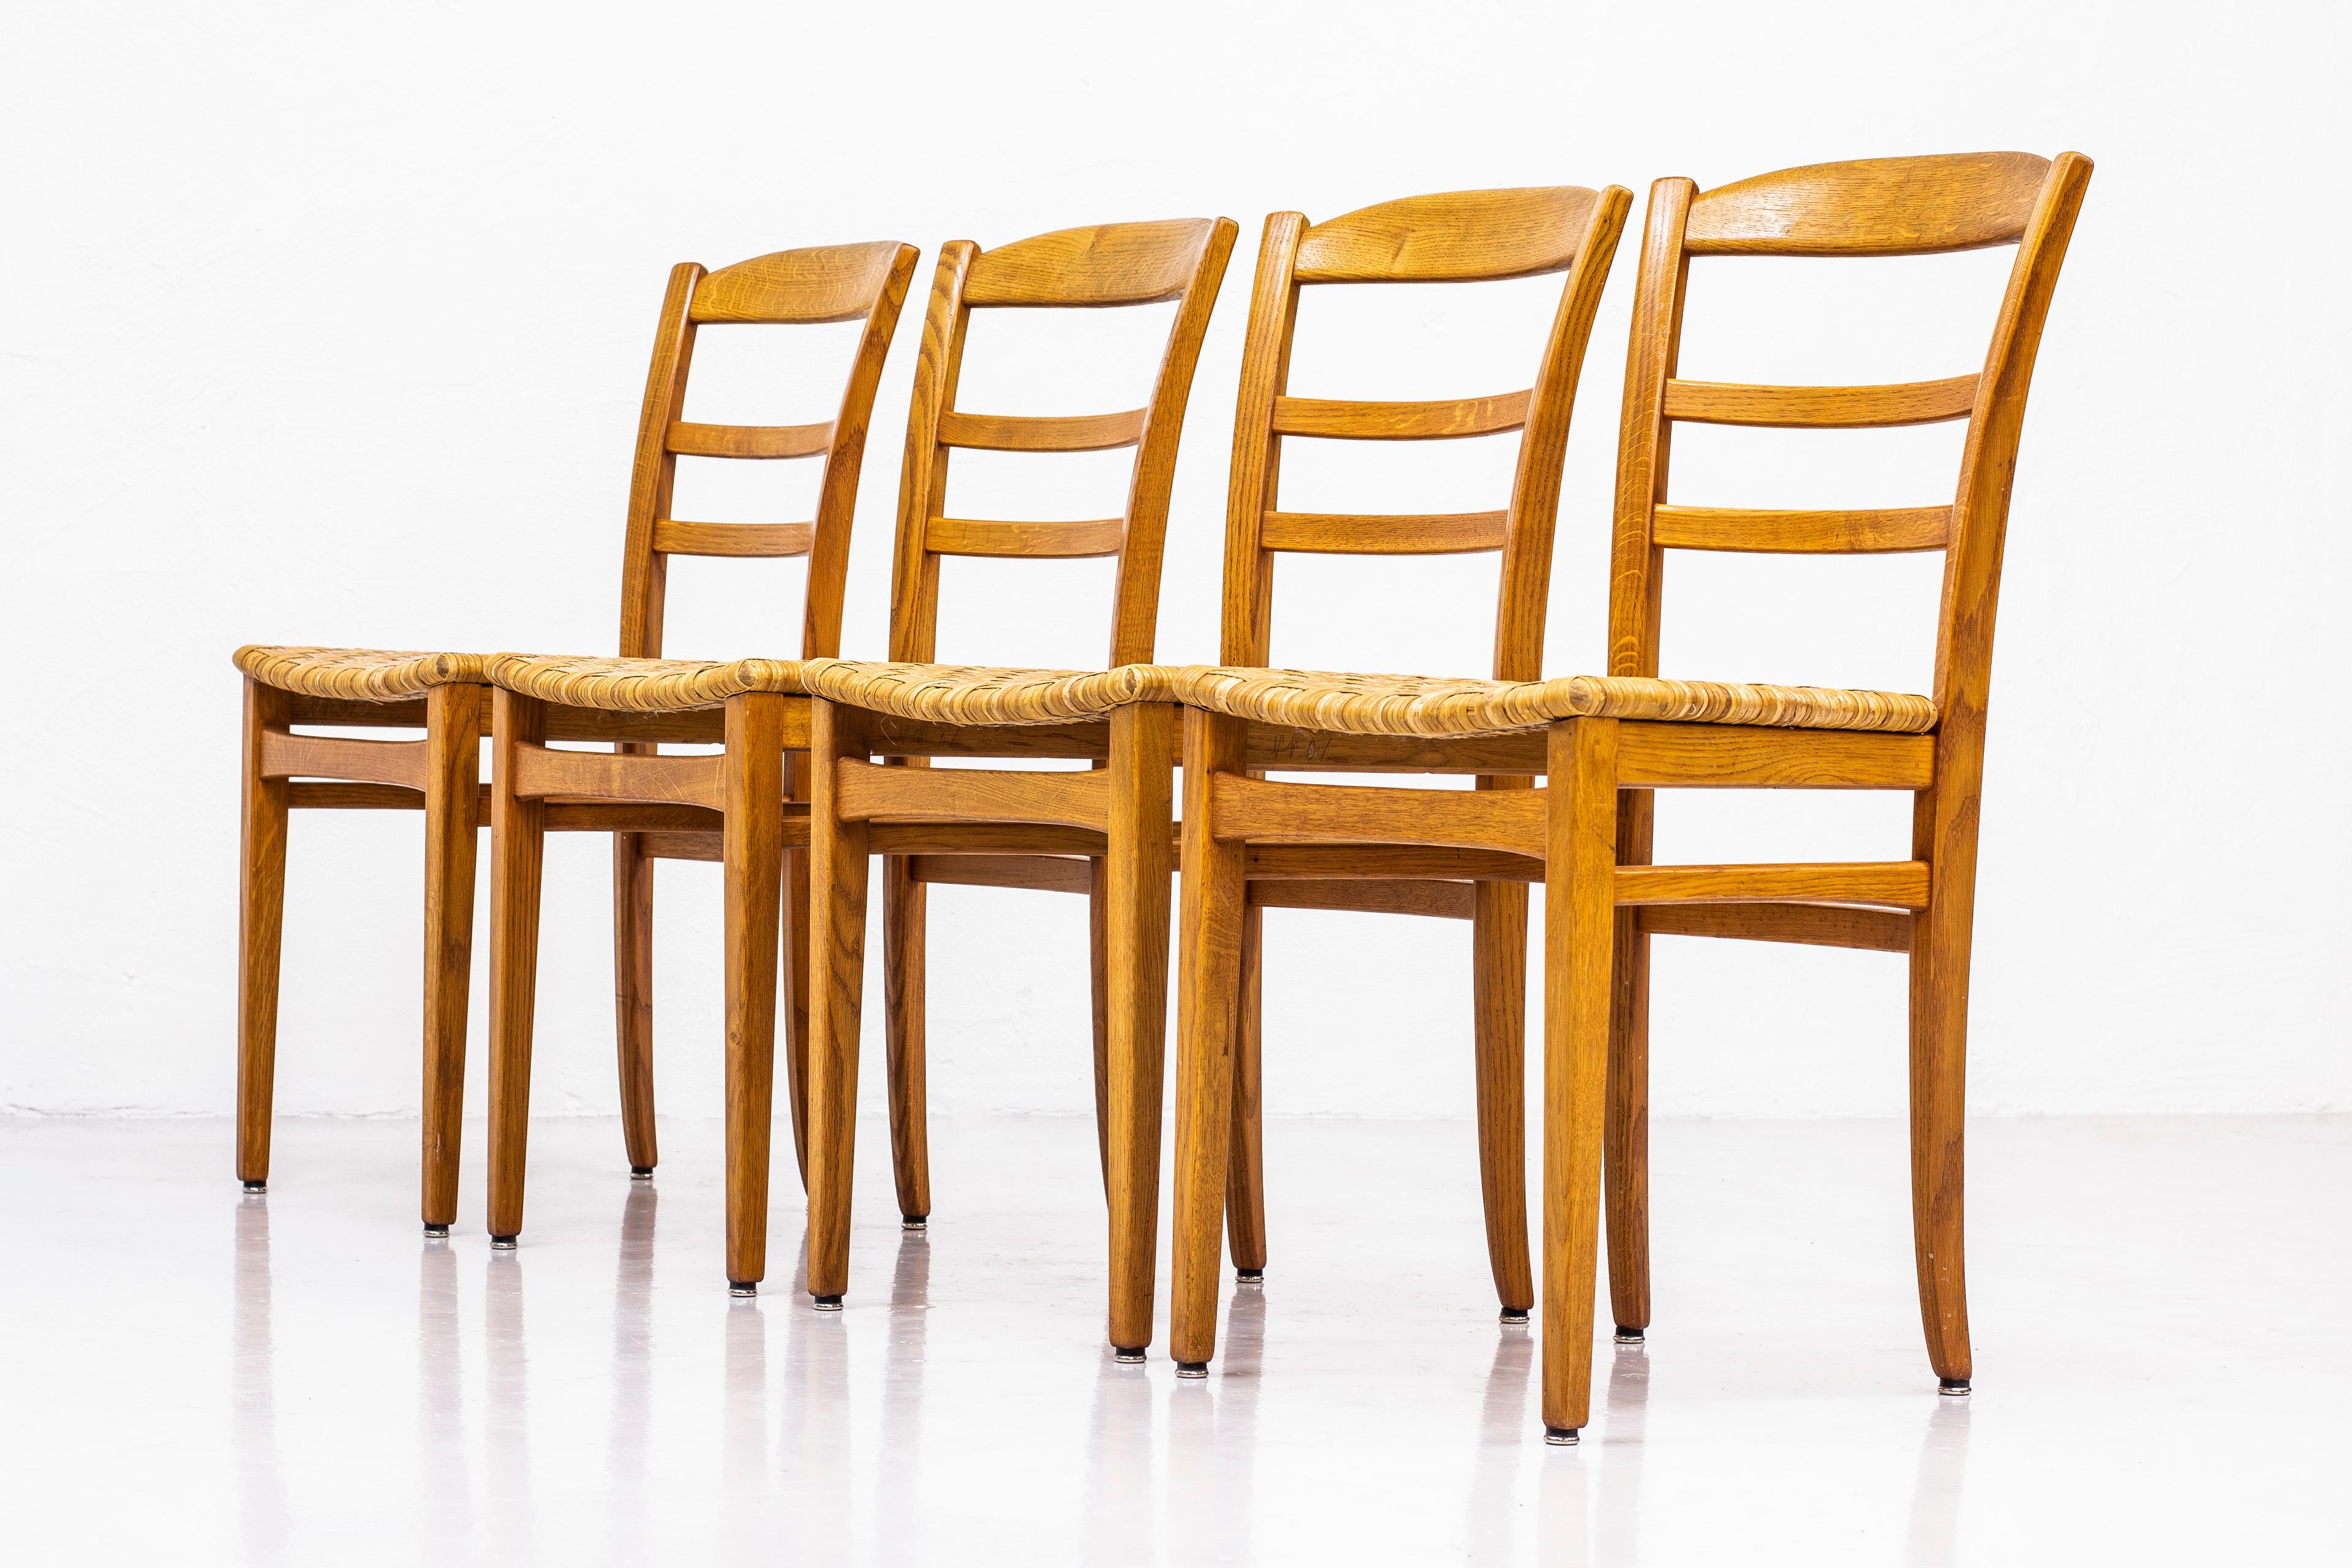 Dining chairs designed by Carl Malmsten. produced in Sweden by O. H. Sjögren during the 1950s. Solid oak with woven cane seats. Very good vintage condition with light age related patina. 

 

Price for the set of four chairs.